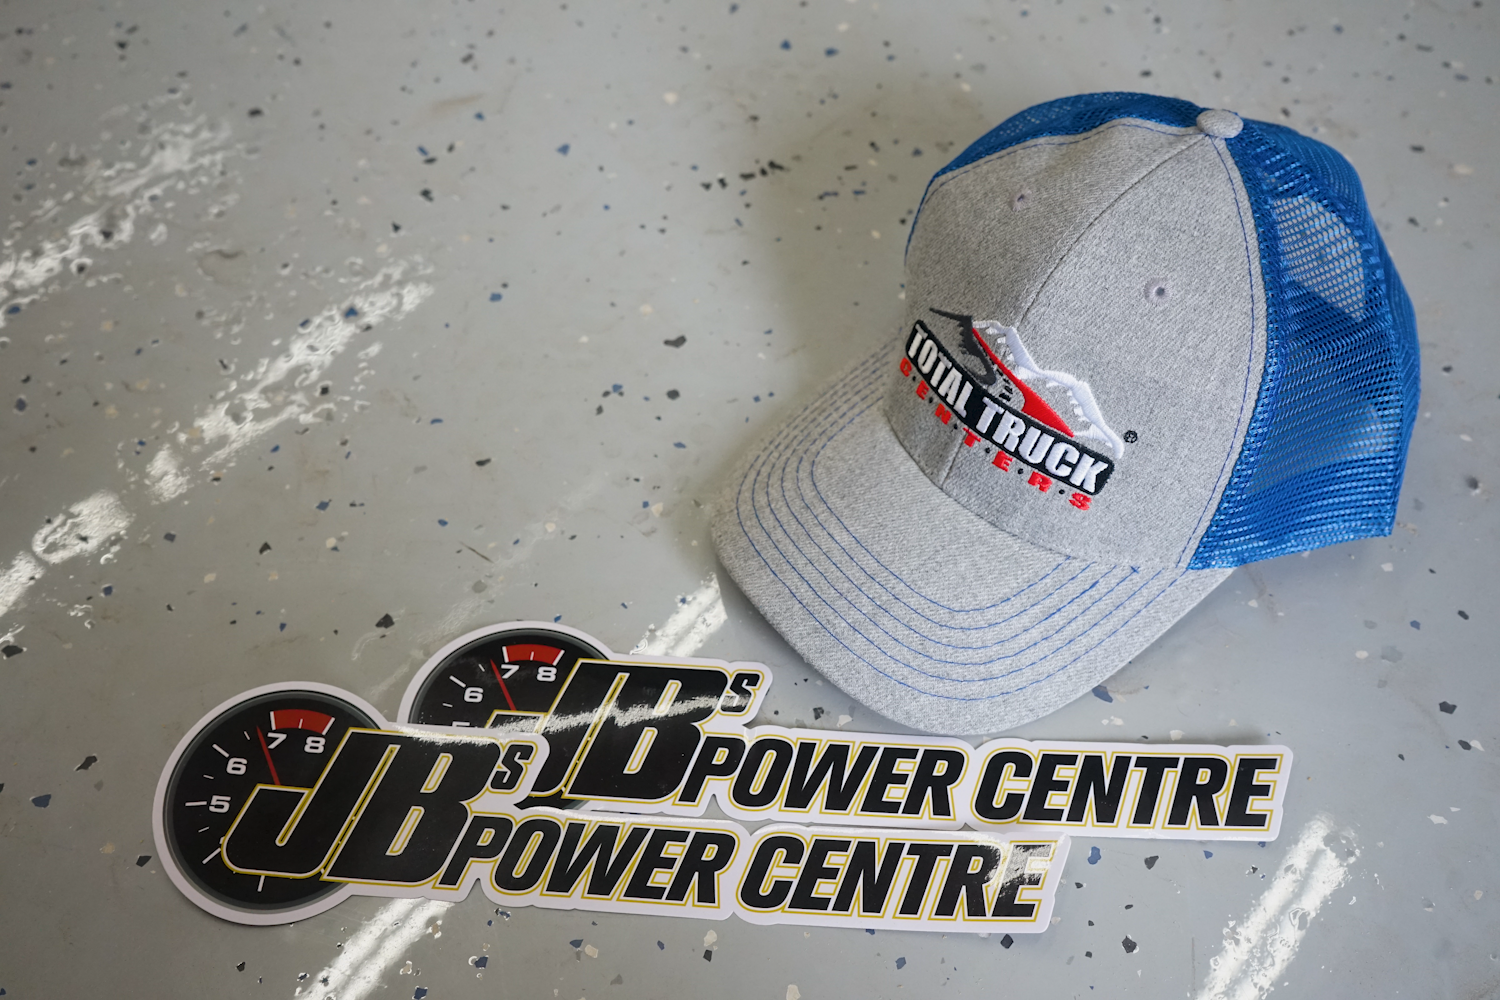 JB's Power Centre Total Truck Center Swag Package - Trucker Hat and Stickers